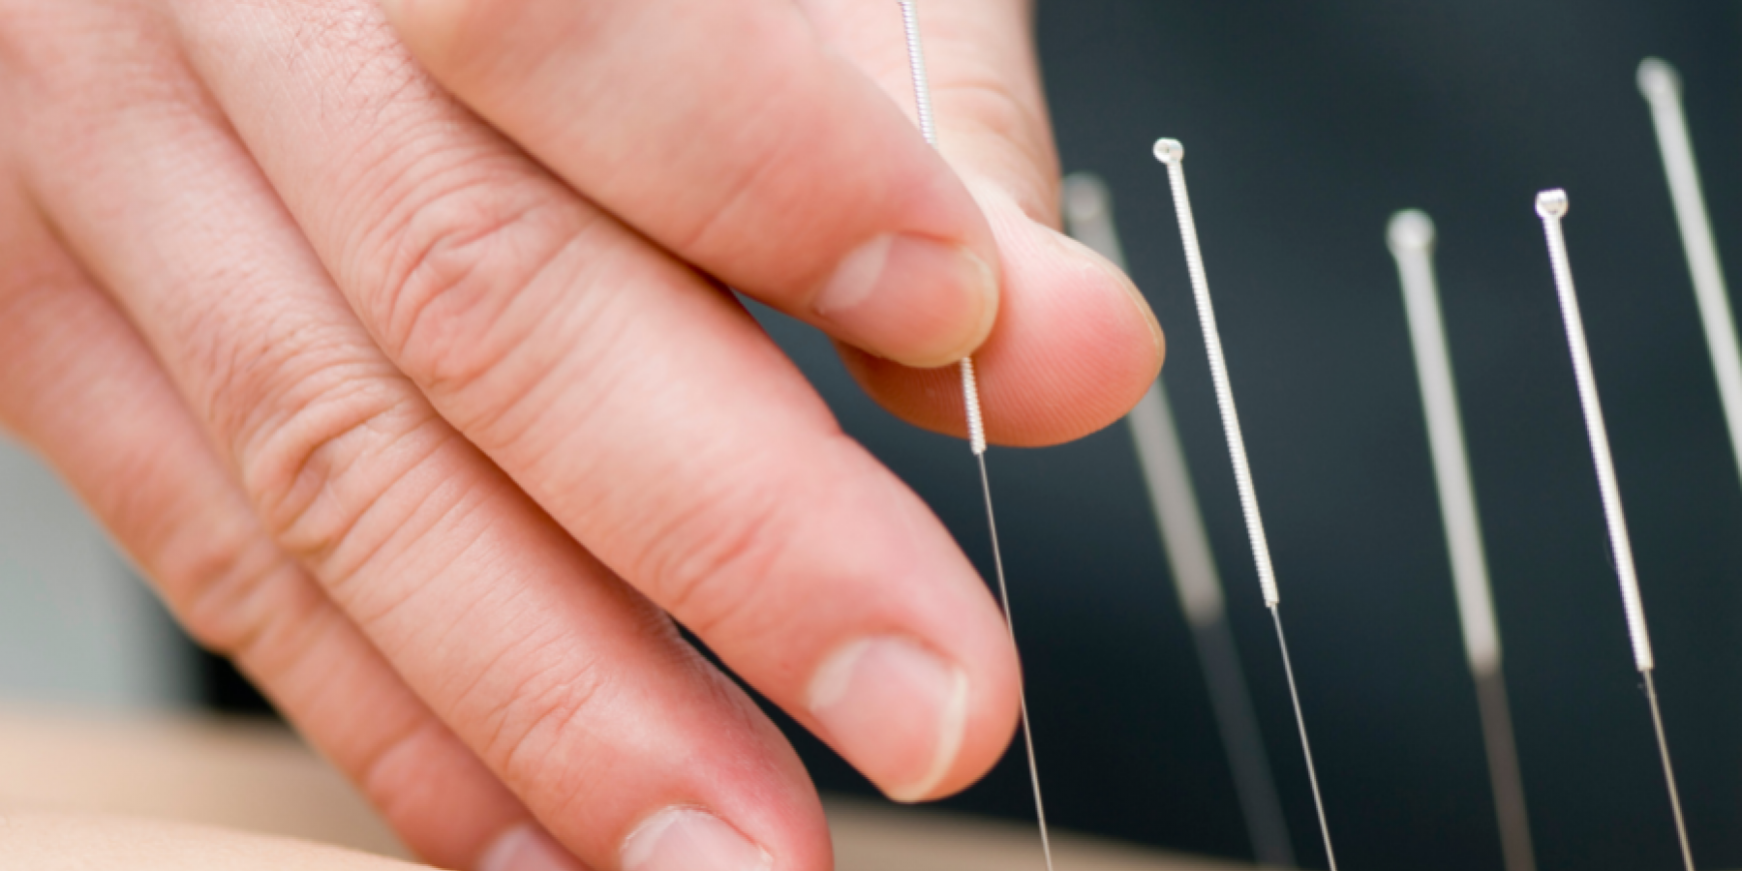 How a postural assessment feeds into an acupuncture treatment